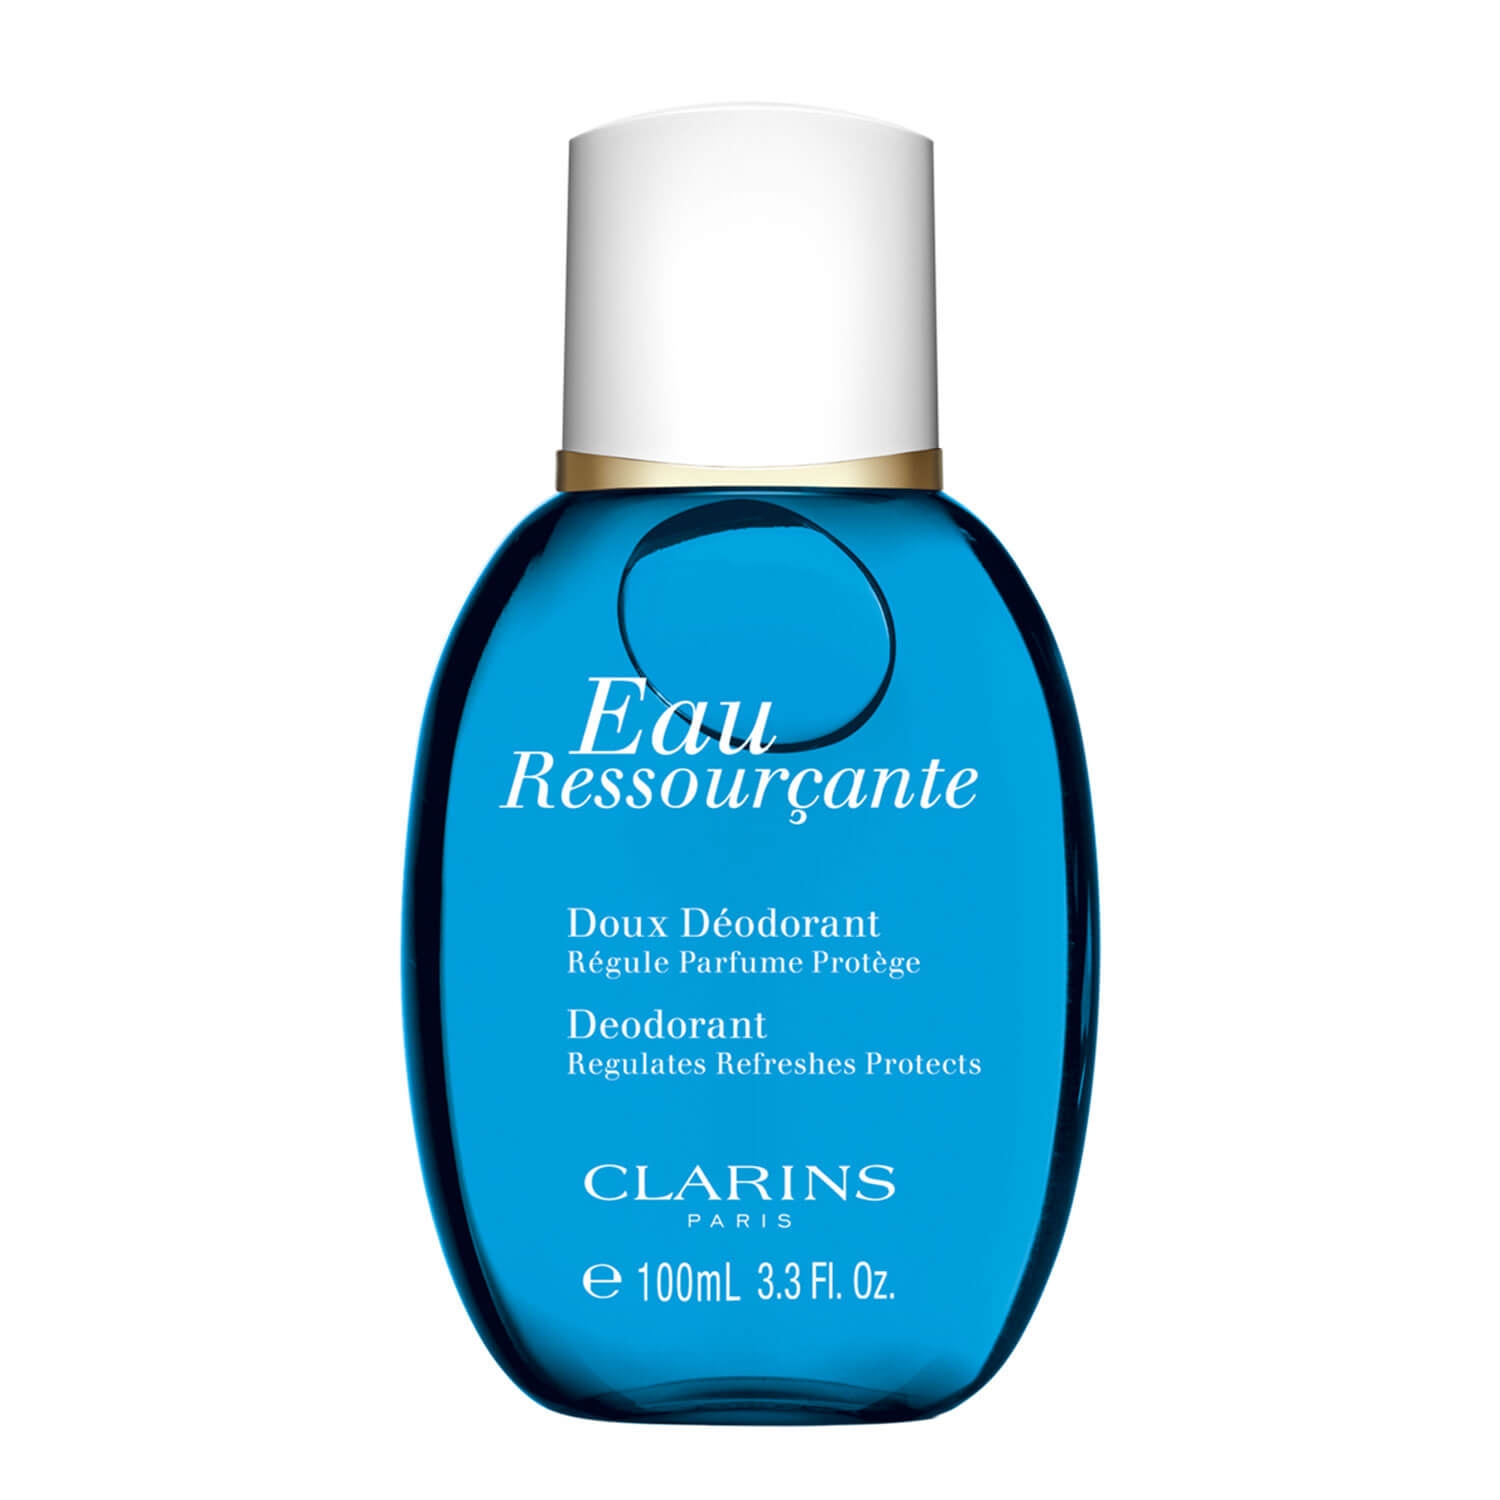 Product image from Clarins Scent - Eau Ressourçante Deodorant